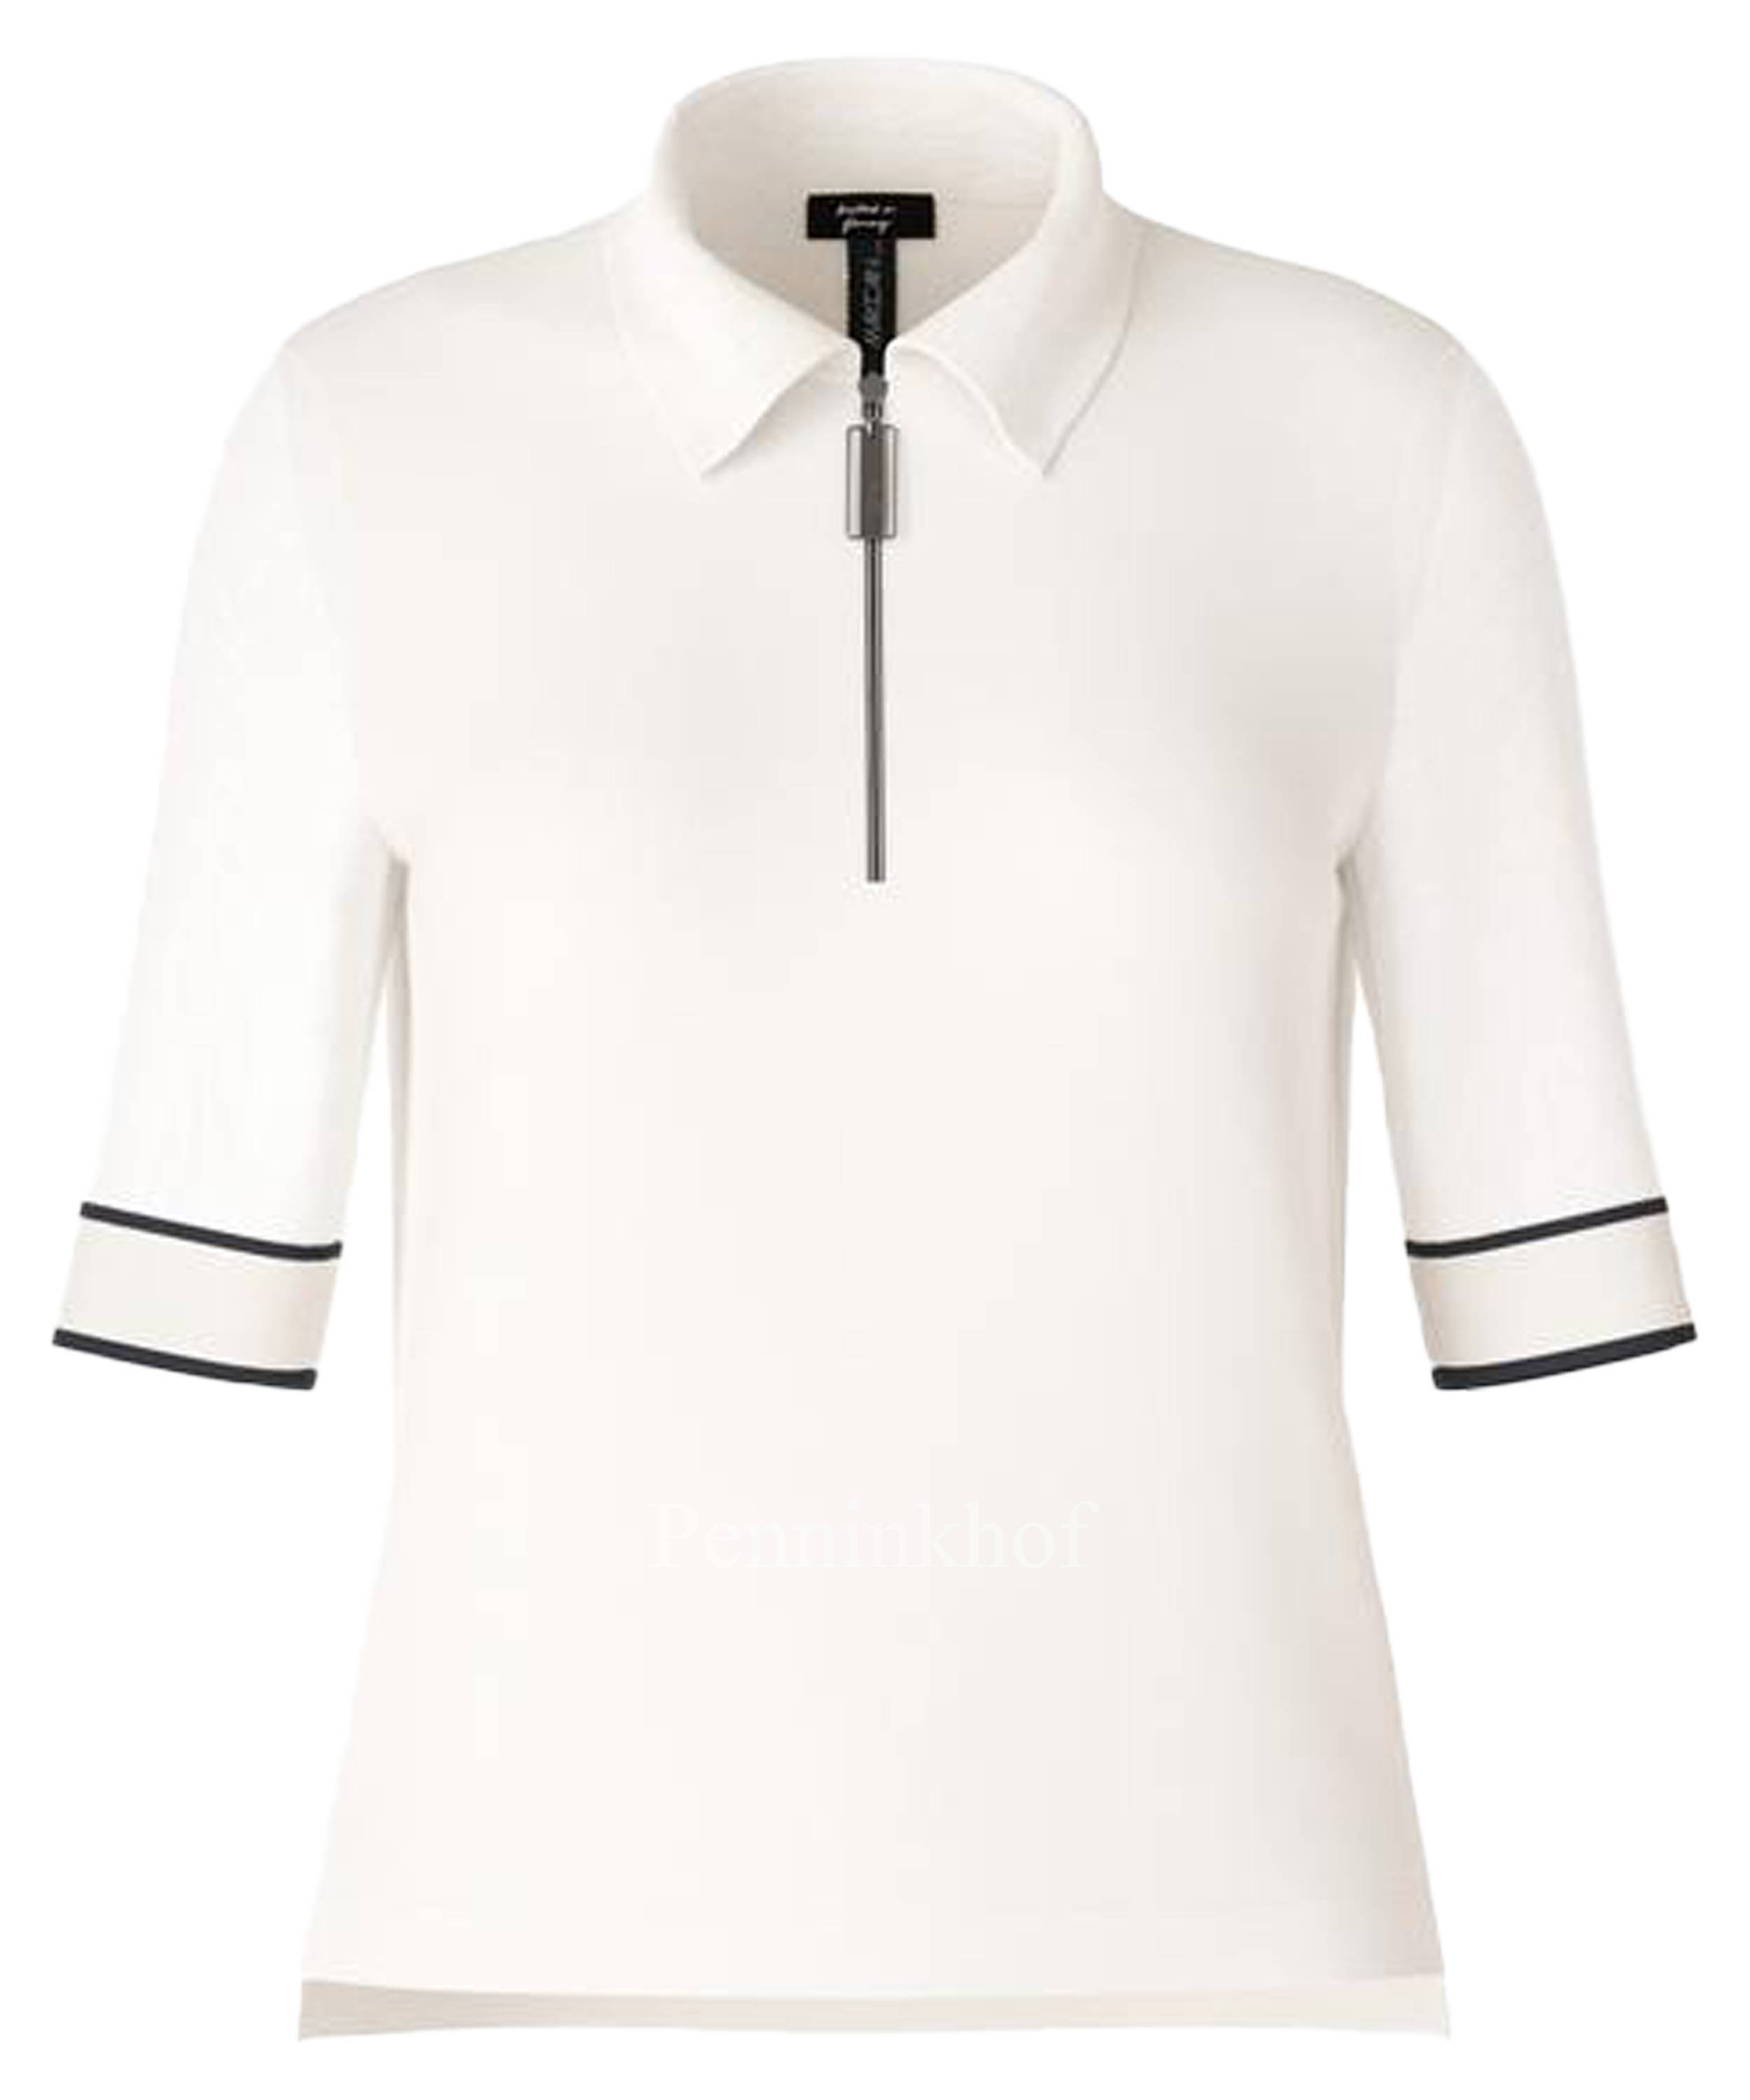 Marc Cain SS 53.01 White shirts by M07